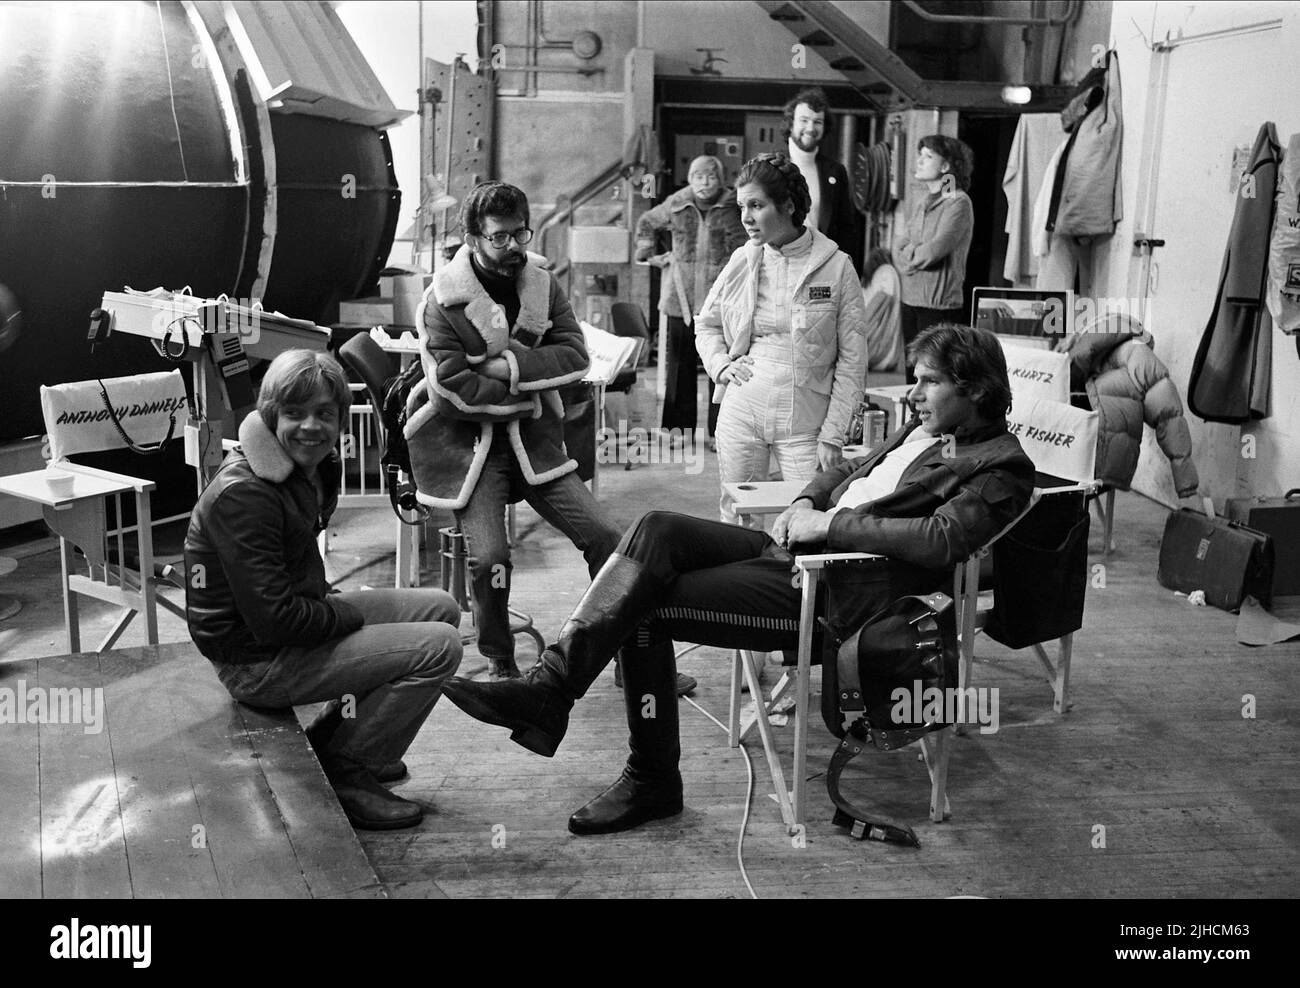 MARK HAMILL, GEORGE LUCAS, CARRIE FISHER, HARRISON FORD, STAR WARS: EPISODE V - THE EMPIRE STRIKES BACK, 1980 Stock Photo